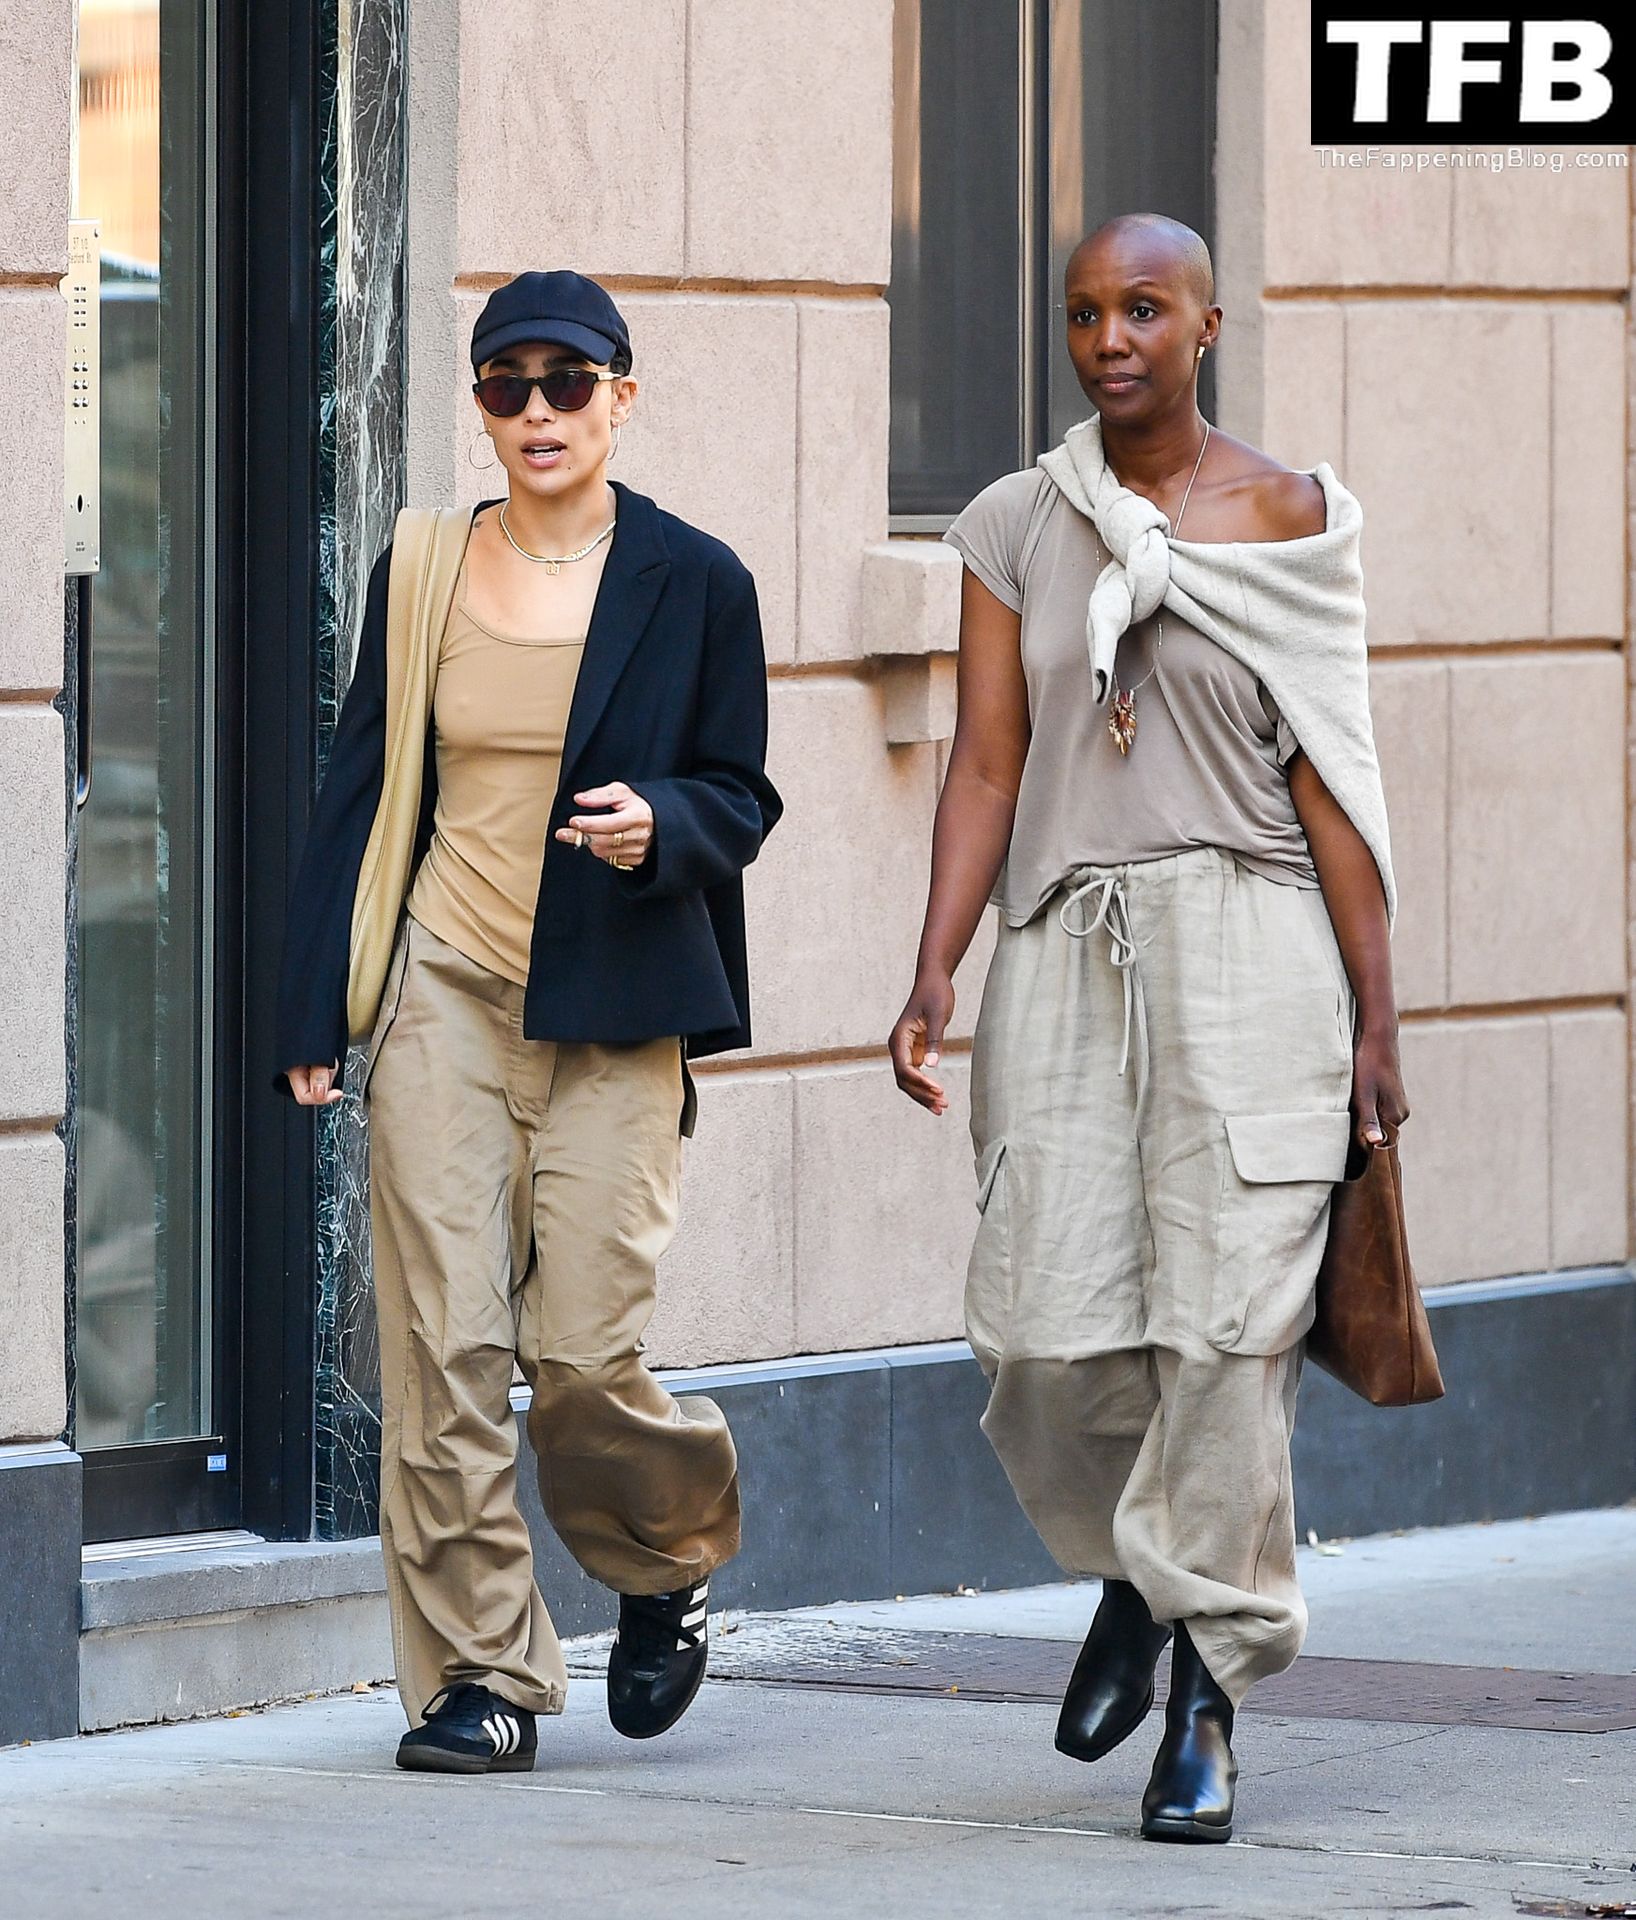 Zoe Kravitz Sexy Tits The Fappening Blog 2 - Braless Zoe Kravitz Steps Out With a Friend in NYC (13 Photos)